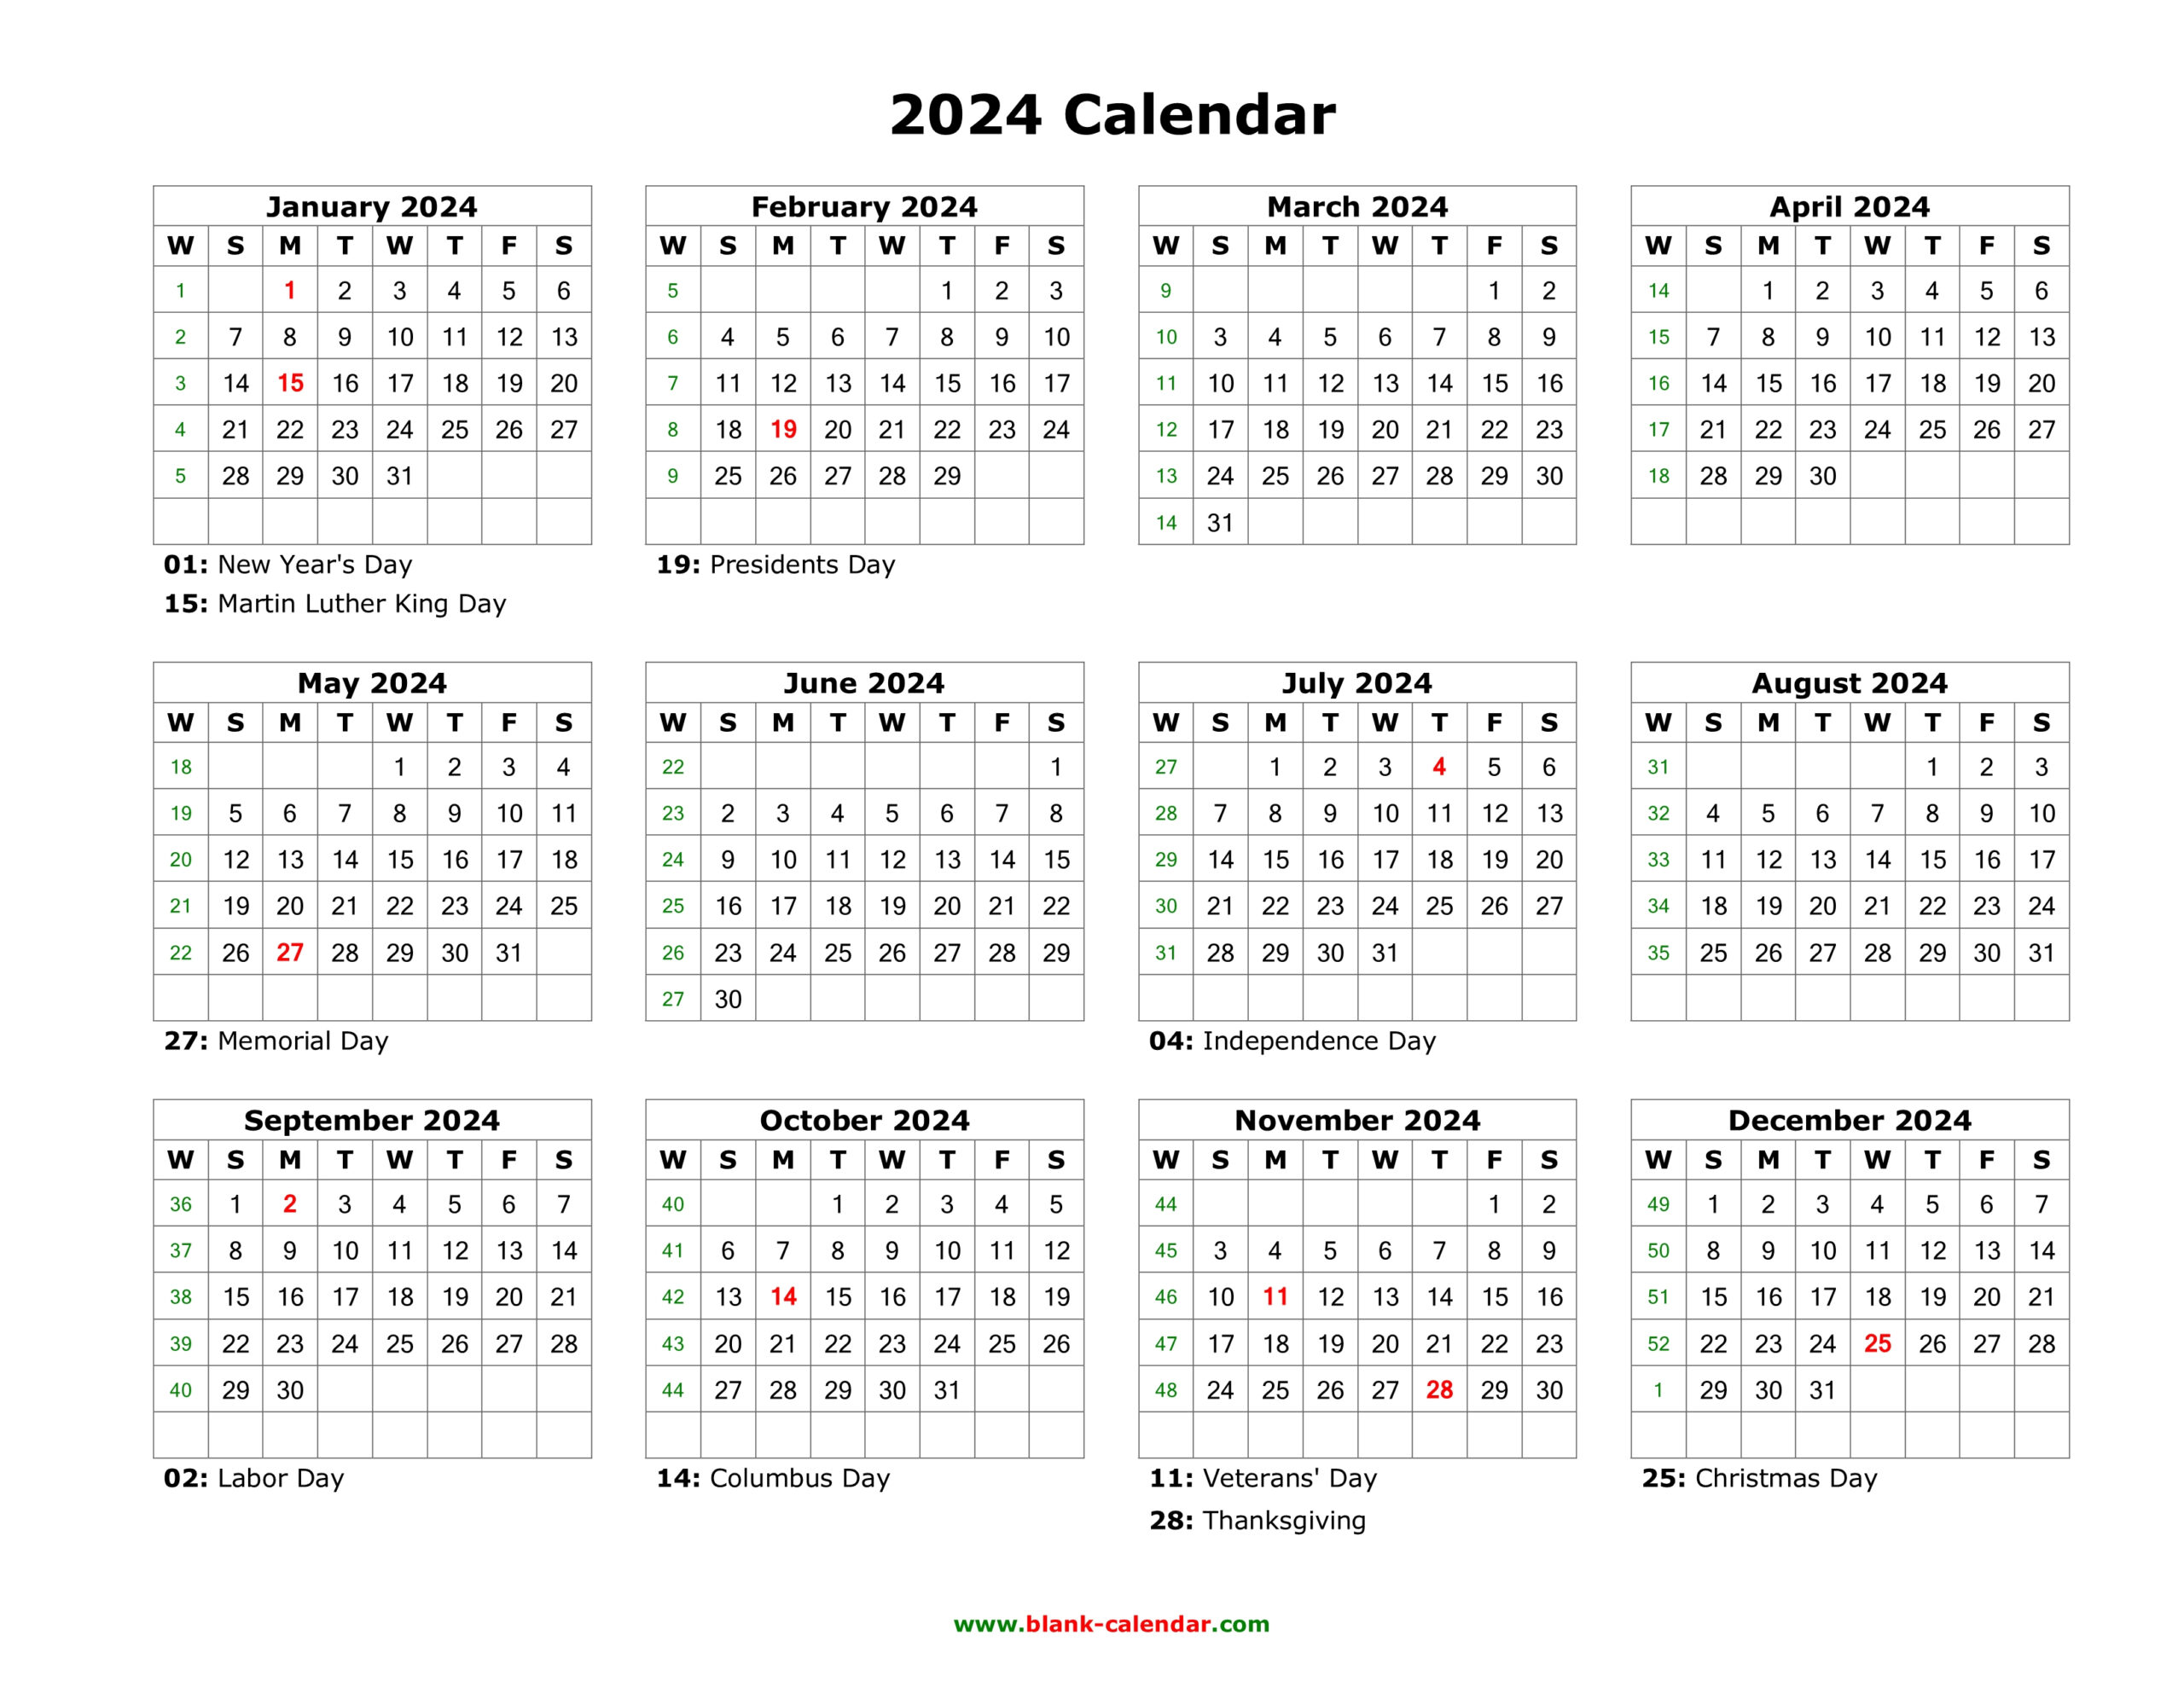 Download Blank Calendar 2024 With Us Holidays (12 Months On One for Printable 2024 Calendar One Page With Holidays